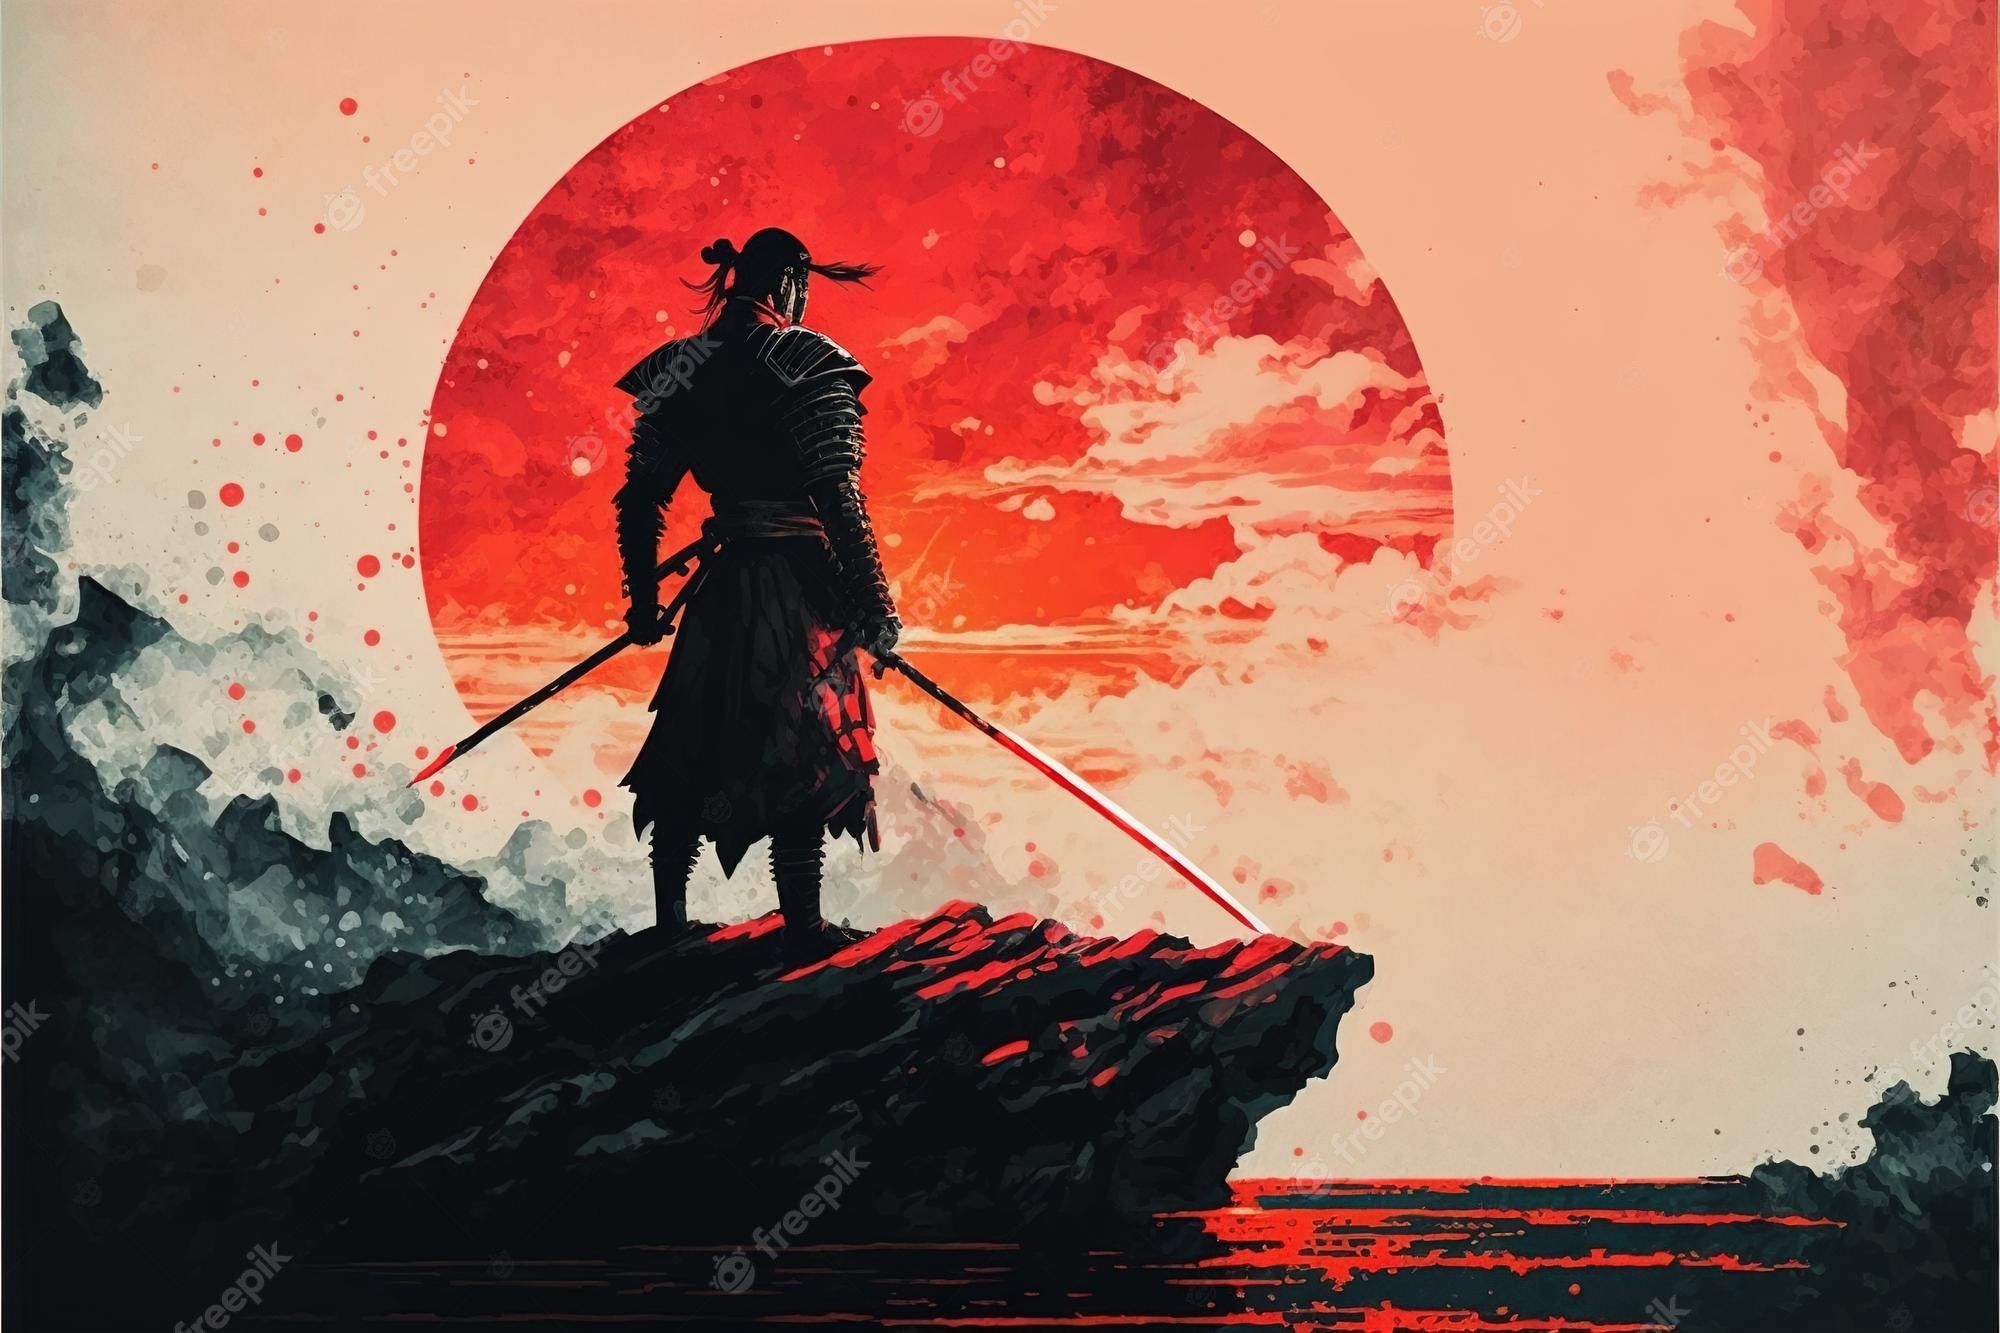 Premium Photo. Scene of samurai with fire sword standing on the rock digital art style illustration painting fantasy concept of a samurai with the sword